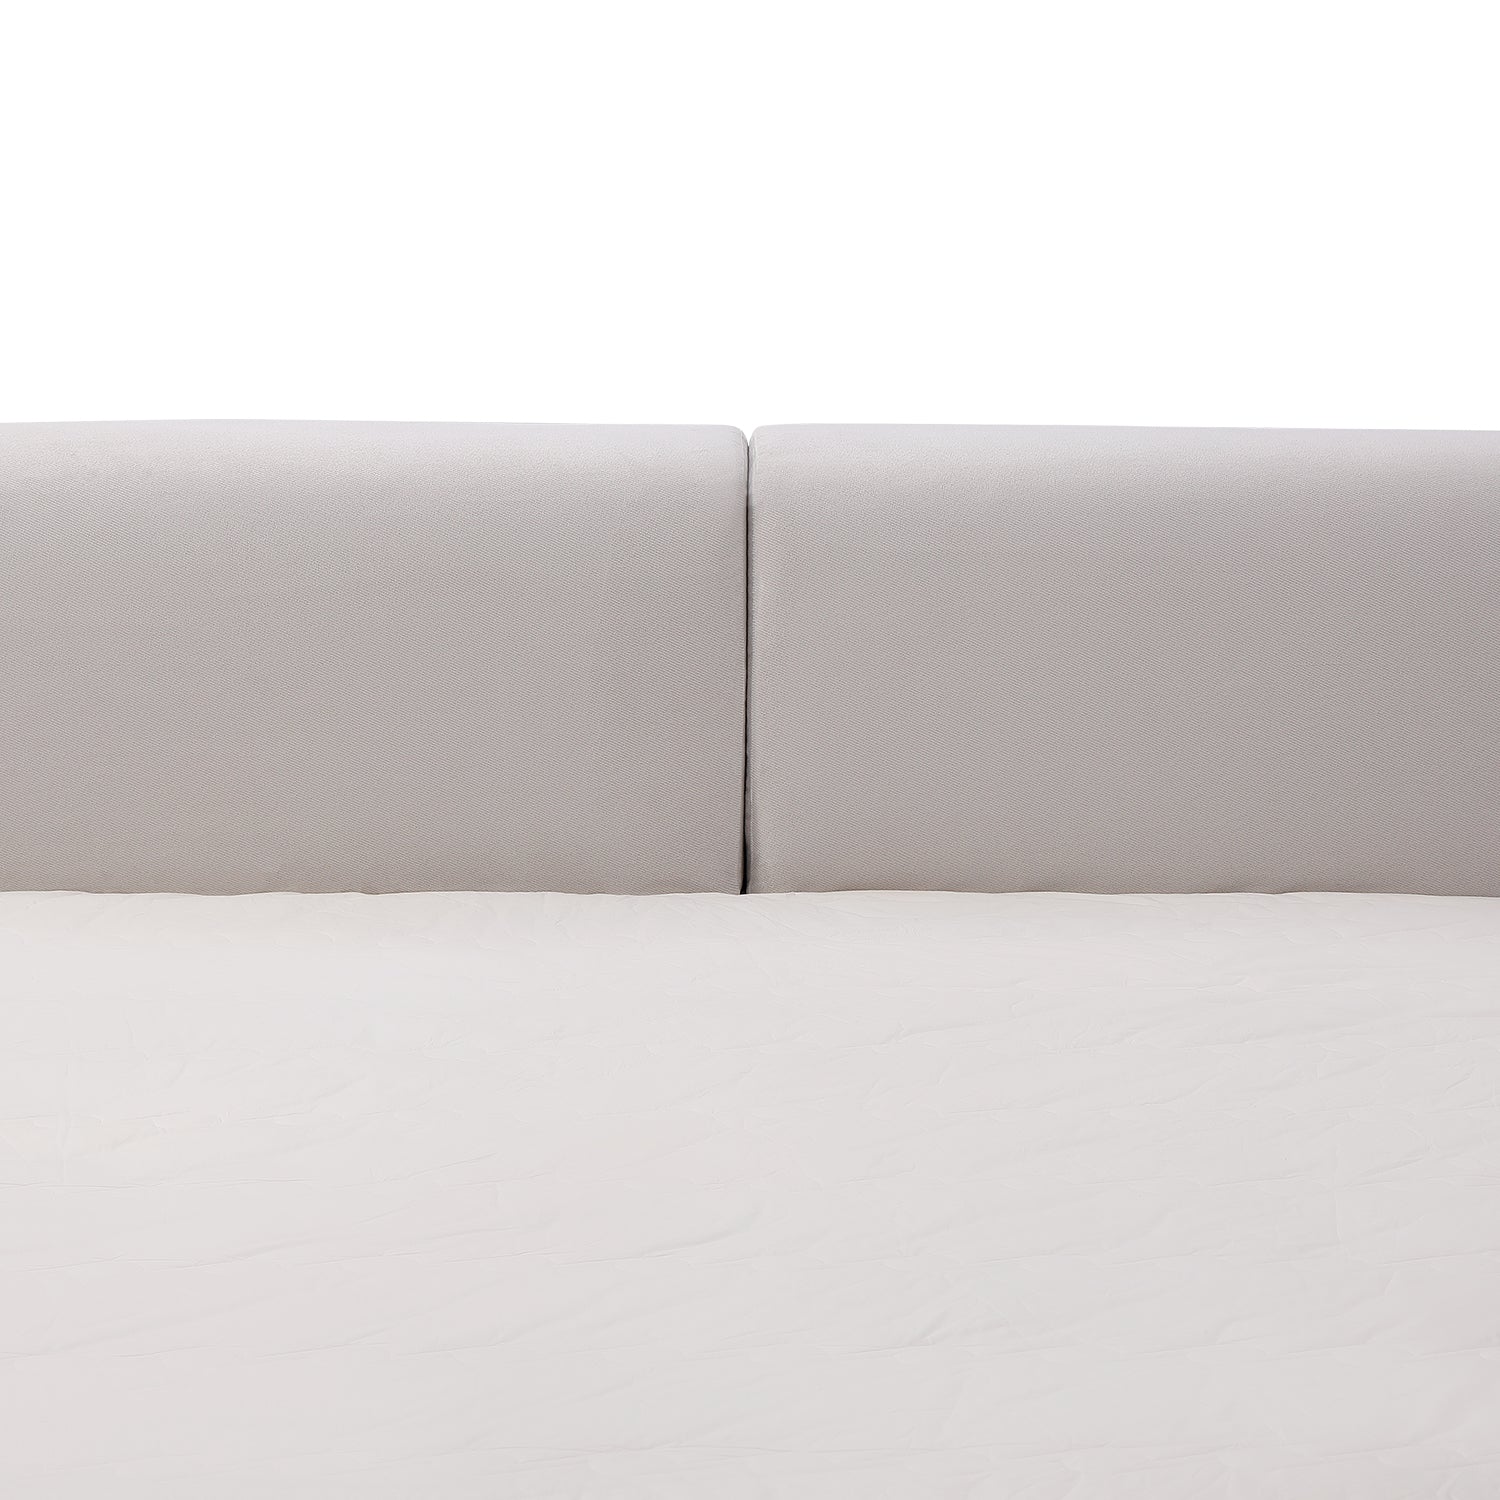 Close-up of DeRUCCI's white fabric bed frame headboard with sleek rectangular panels and minimalist design